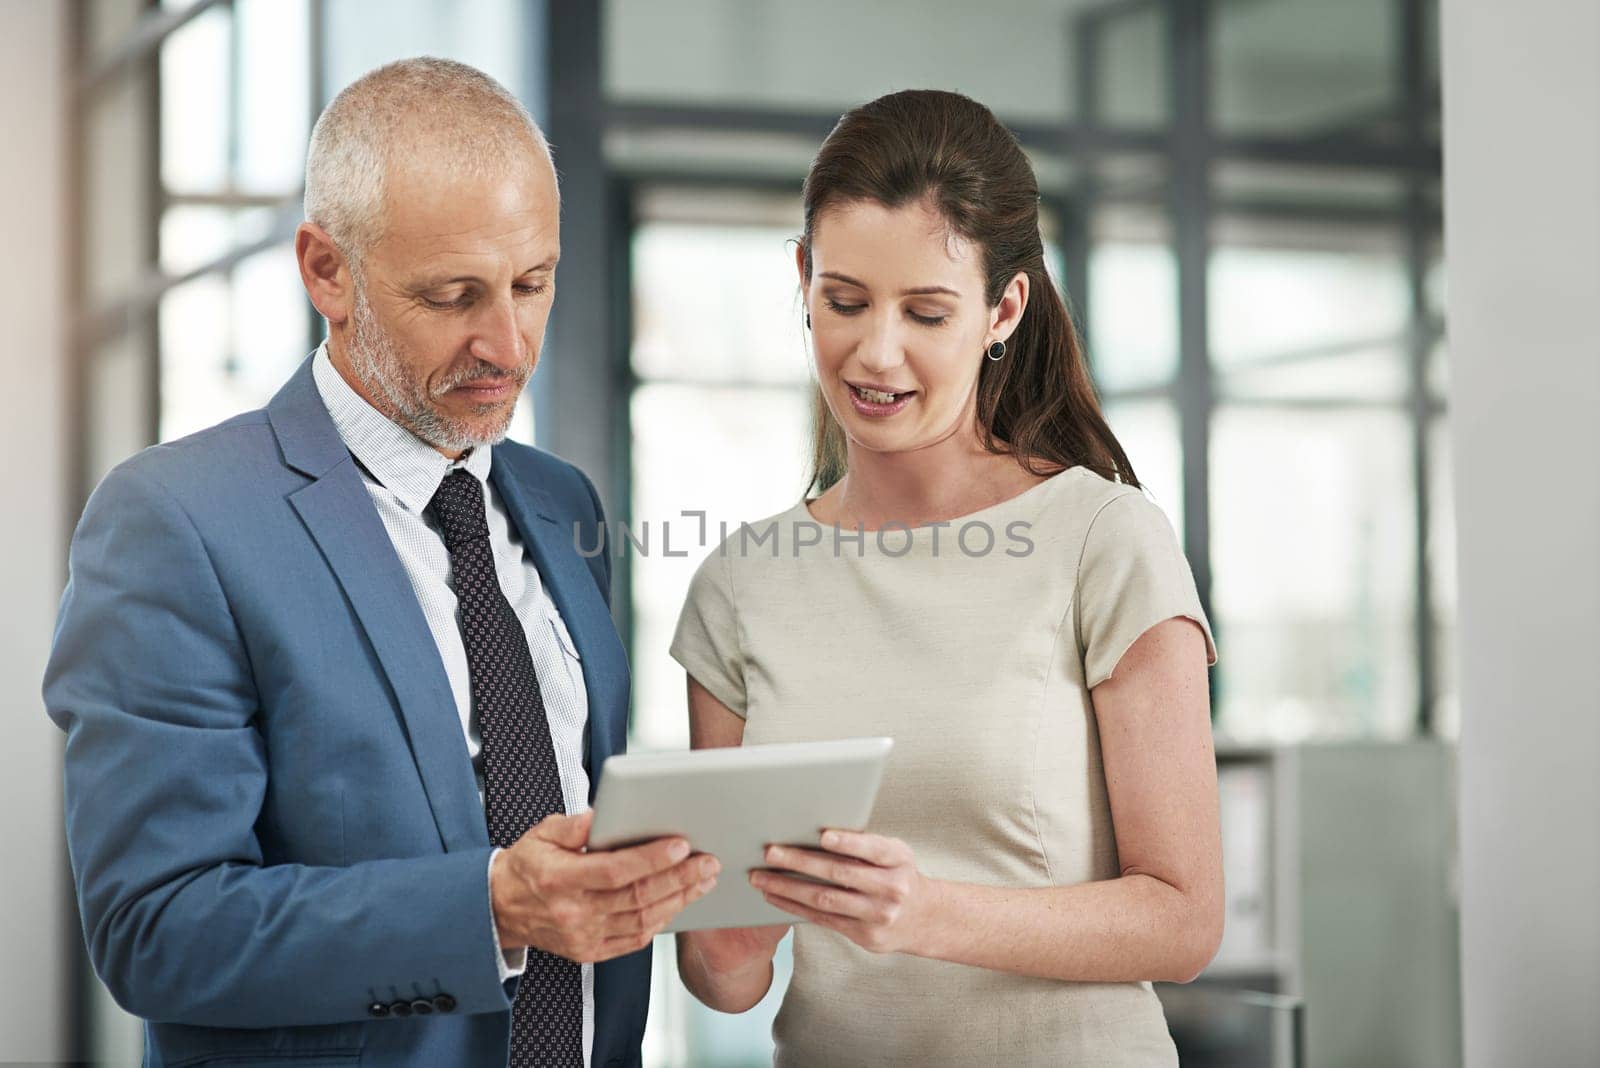 Business people, tablet and communication on a web management project with tech. Staff, corporate team and mature CEO with woman worker planning a internet UI strategy in a office with a conversation.